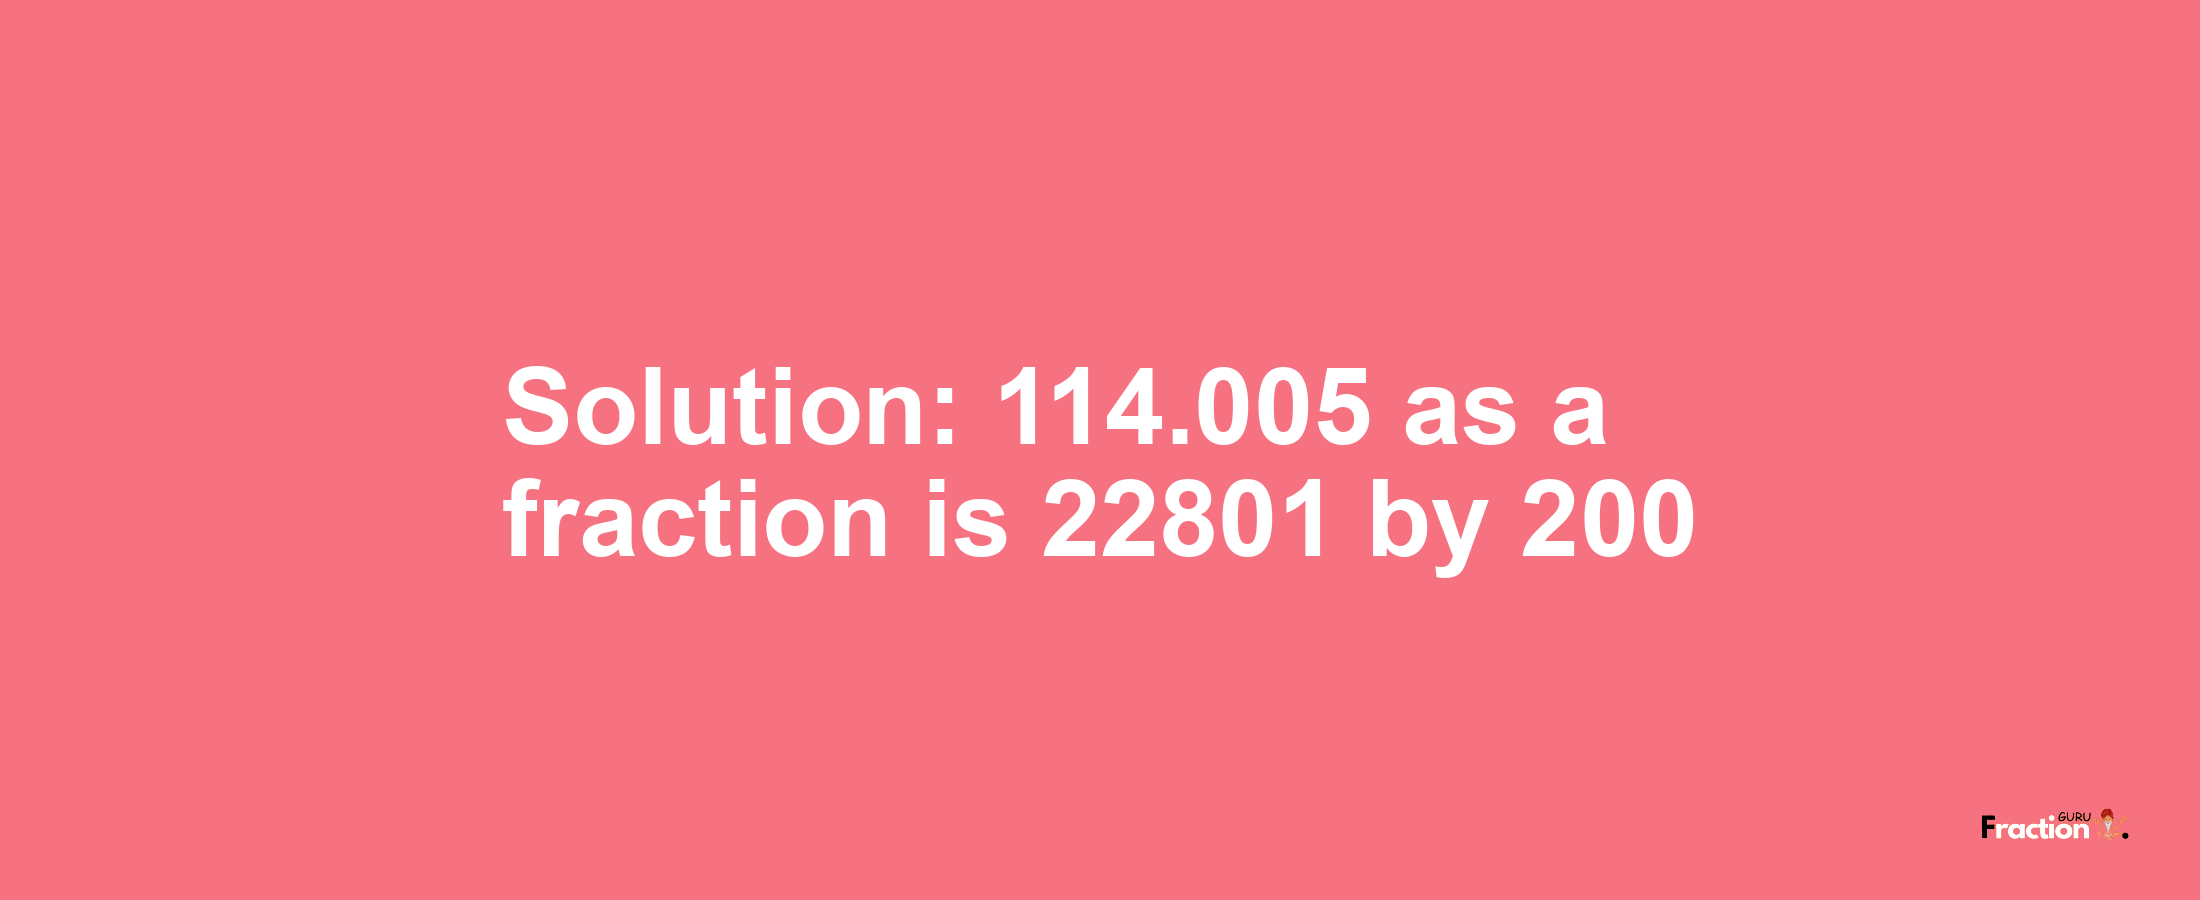 Solution:114.005 as a fraction is 22801/200